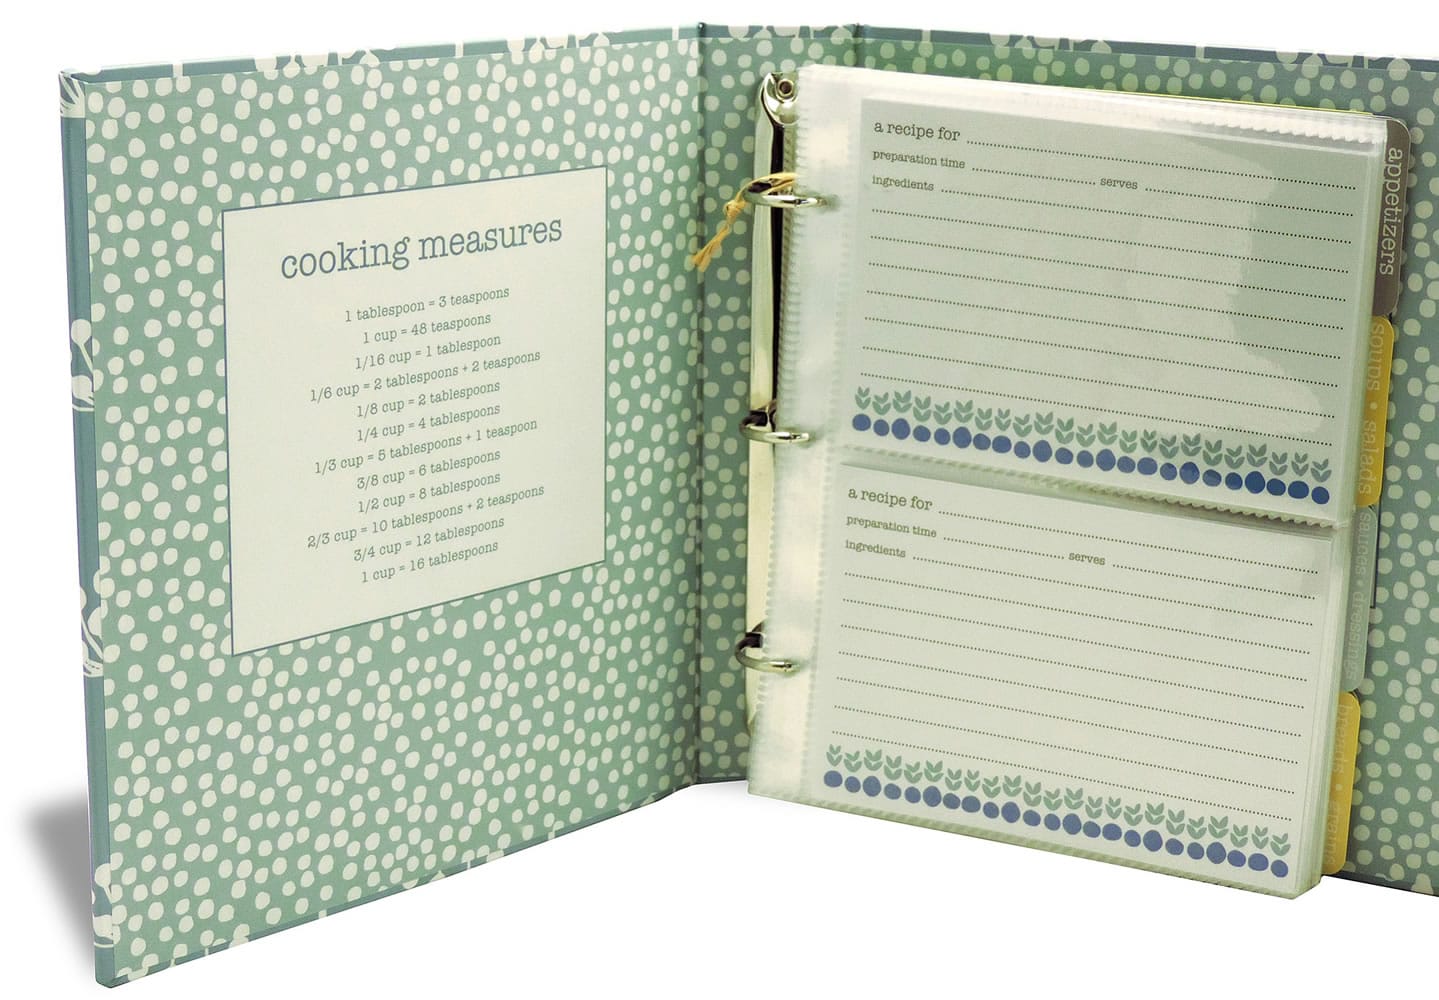 CookbookPeople.com
The Fresh cookbook binder has 12 dividers and holds up to 80 recipe cards.